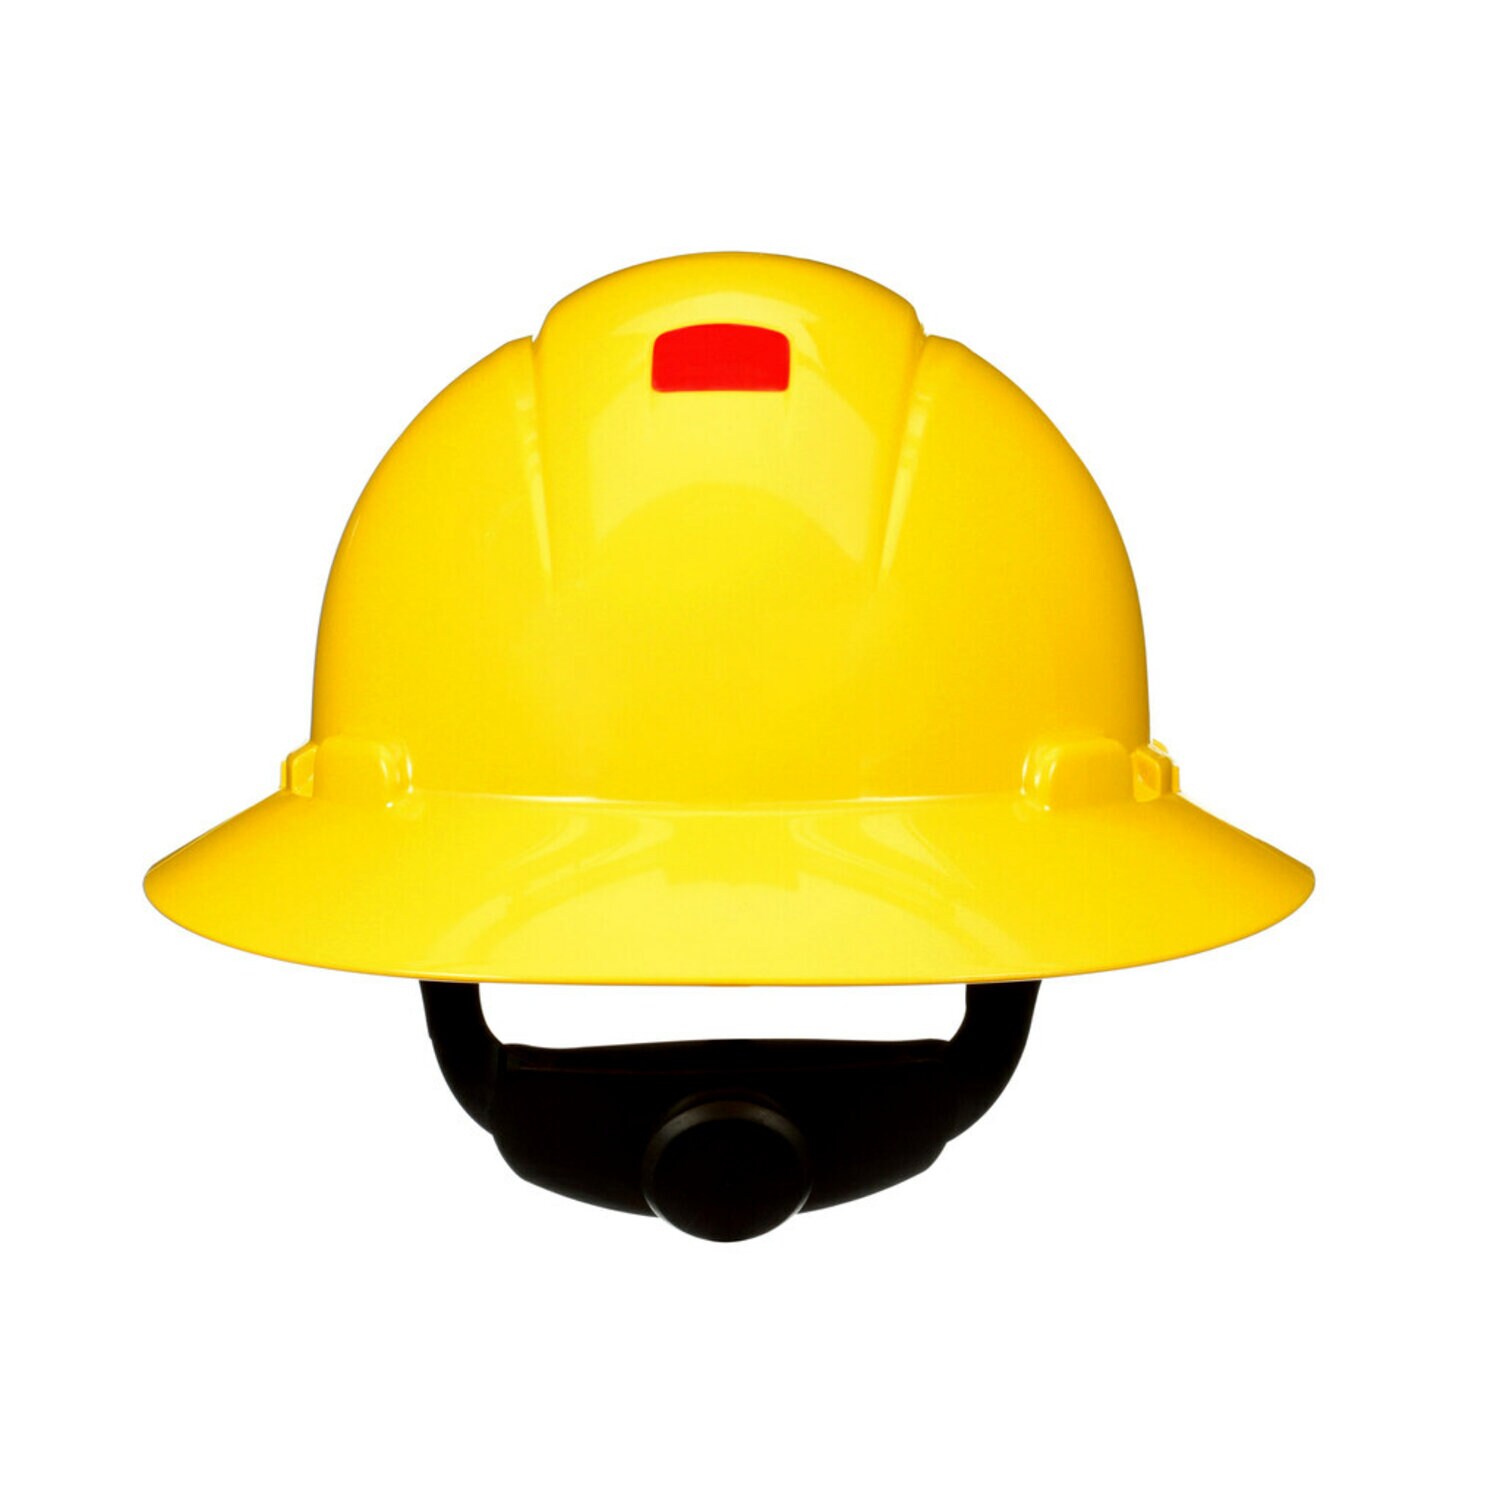 7100240029 - 3M SecureFit Full Brim Hard Hat H-802SFR-UV, Yellow, 4-Point Pressure Diffusion Ratchet Suspension, with UVicator, 20 ea/Case